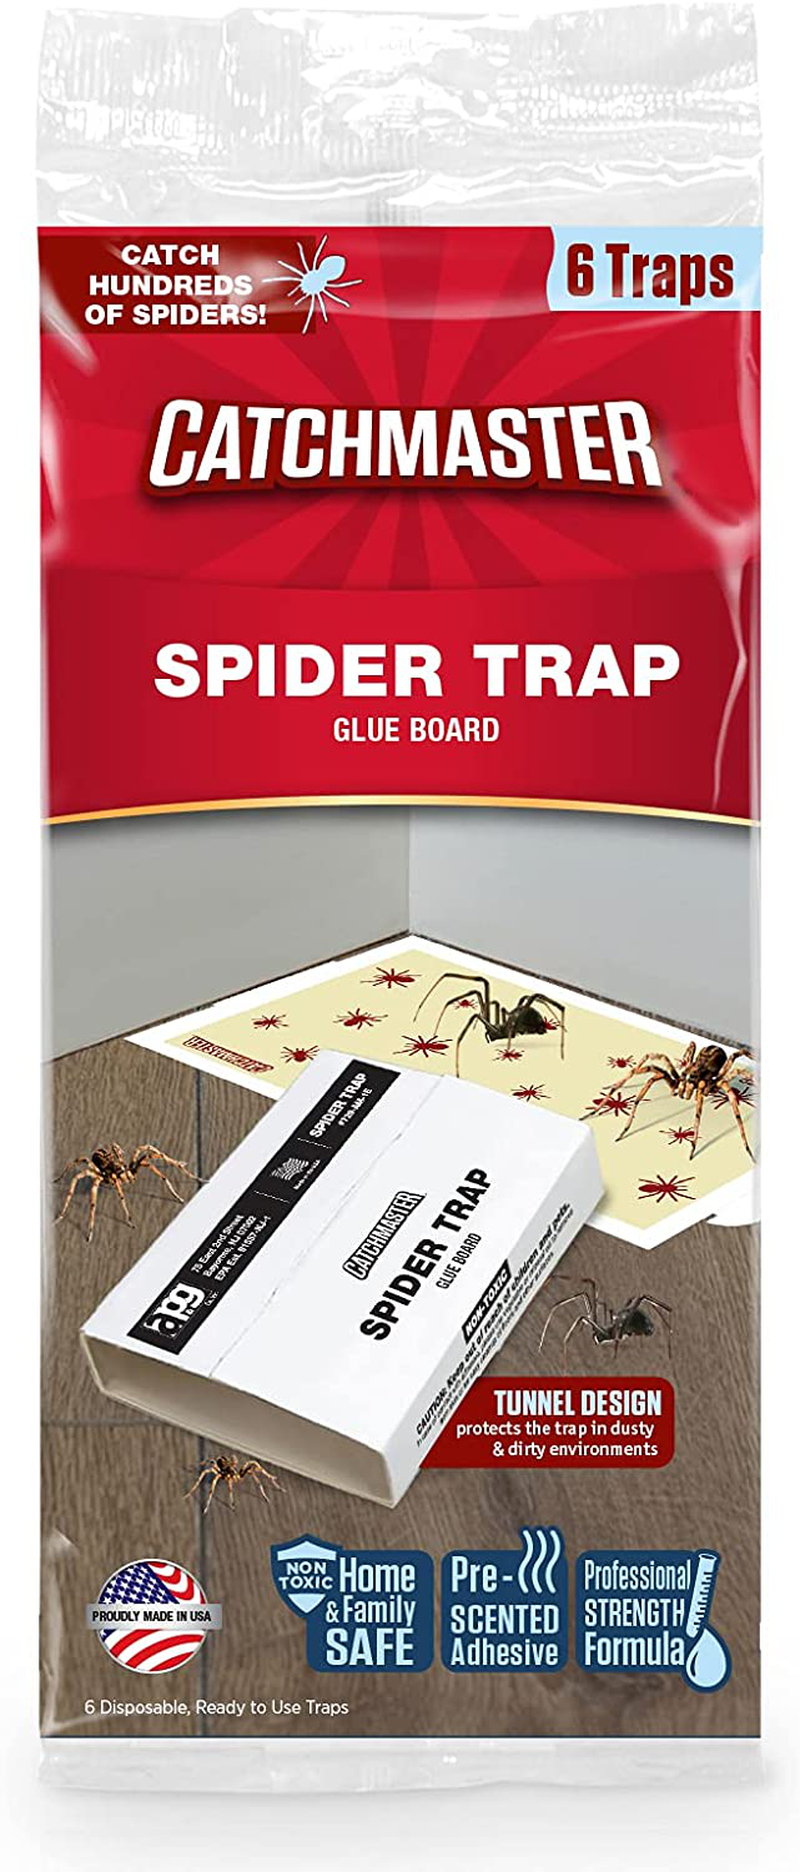 Catchmaster Spider Trap - Ready to Use Heavy Duty Glue, Safe, Non-Toxic Trap - 6 Sticky Glue Traps